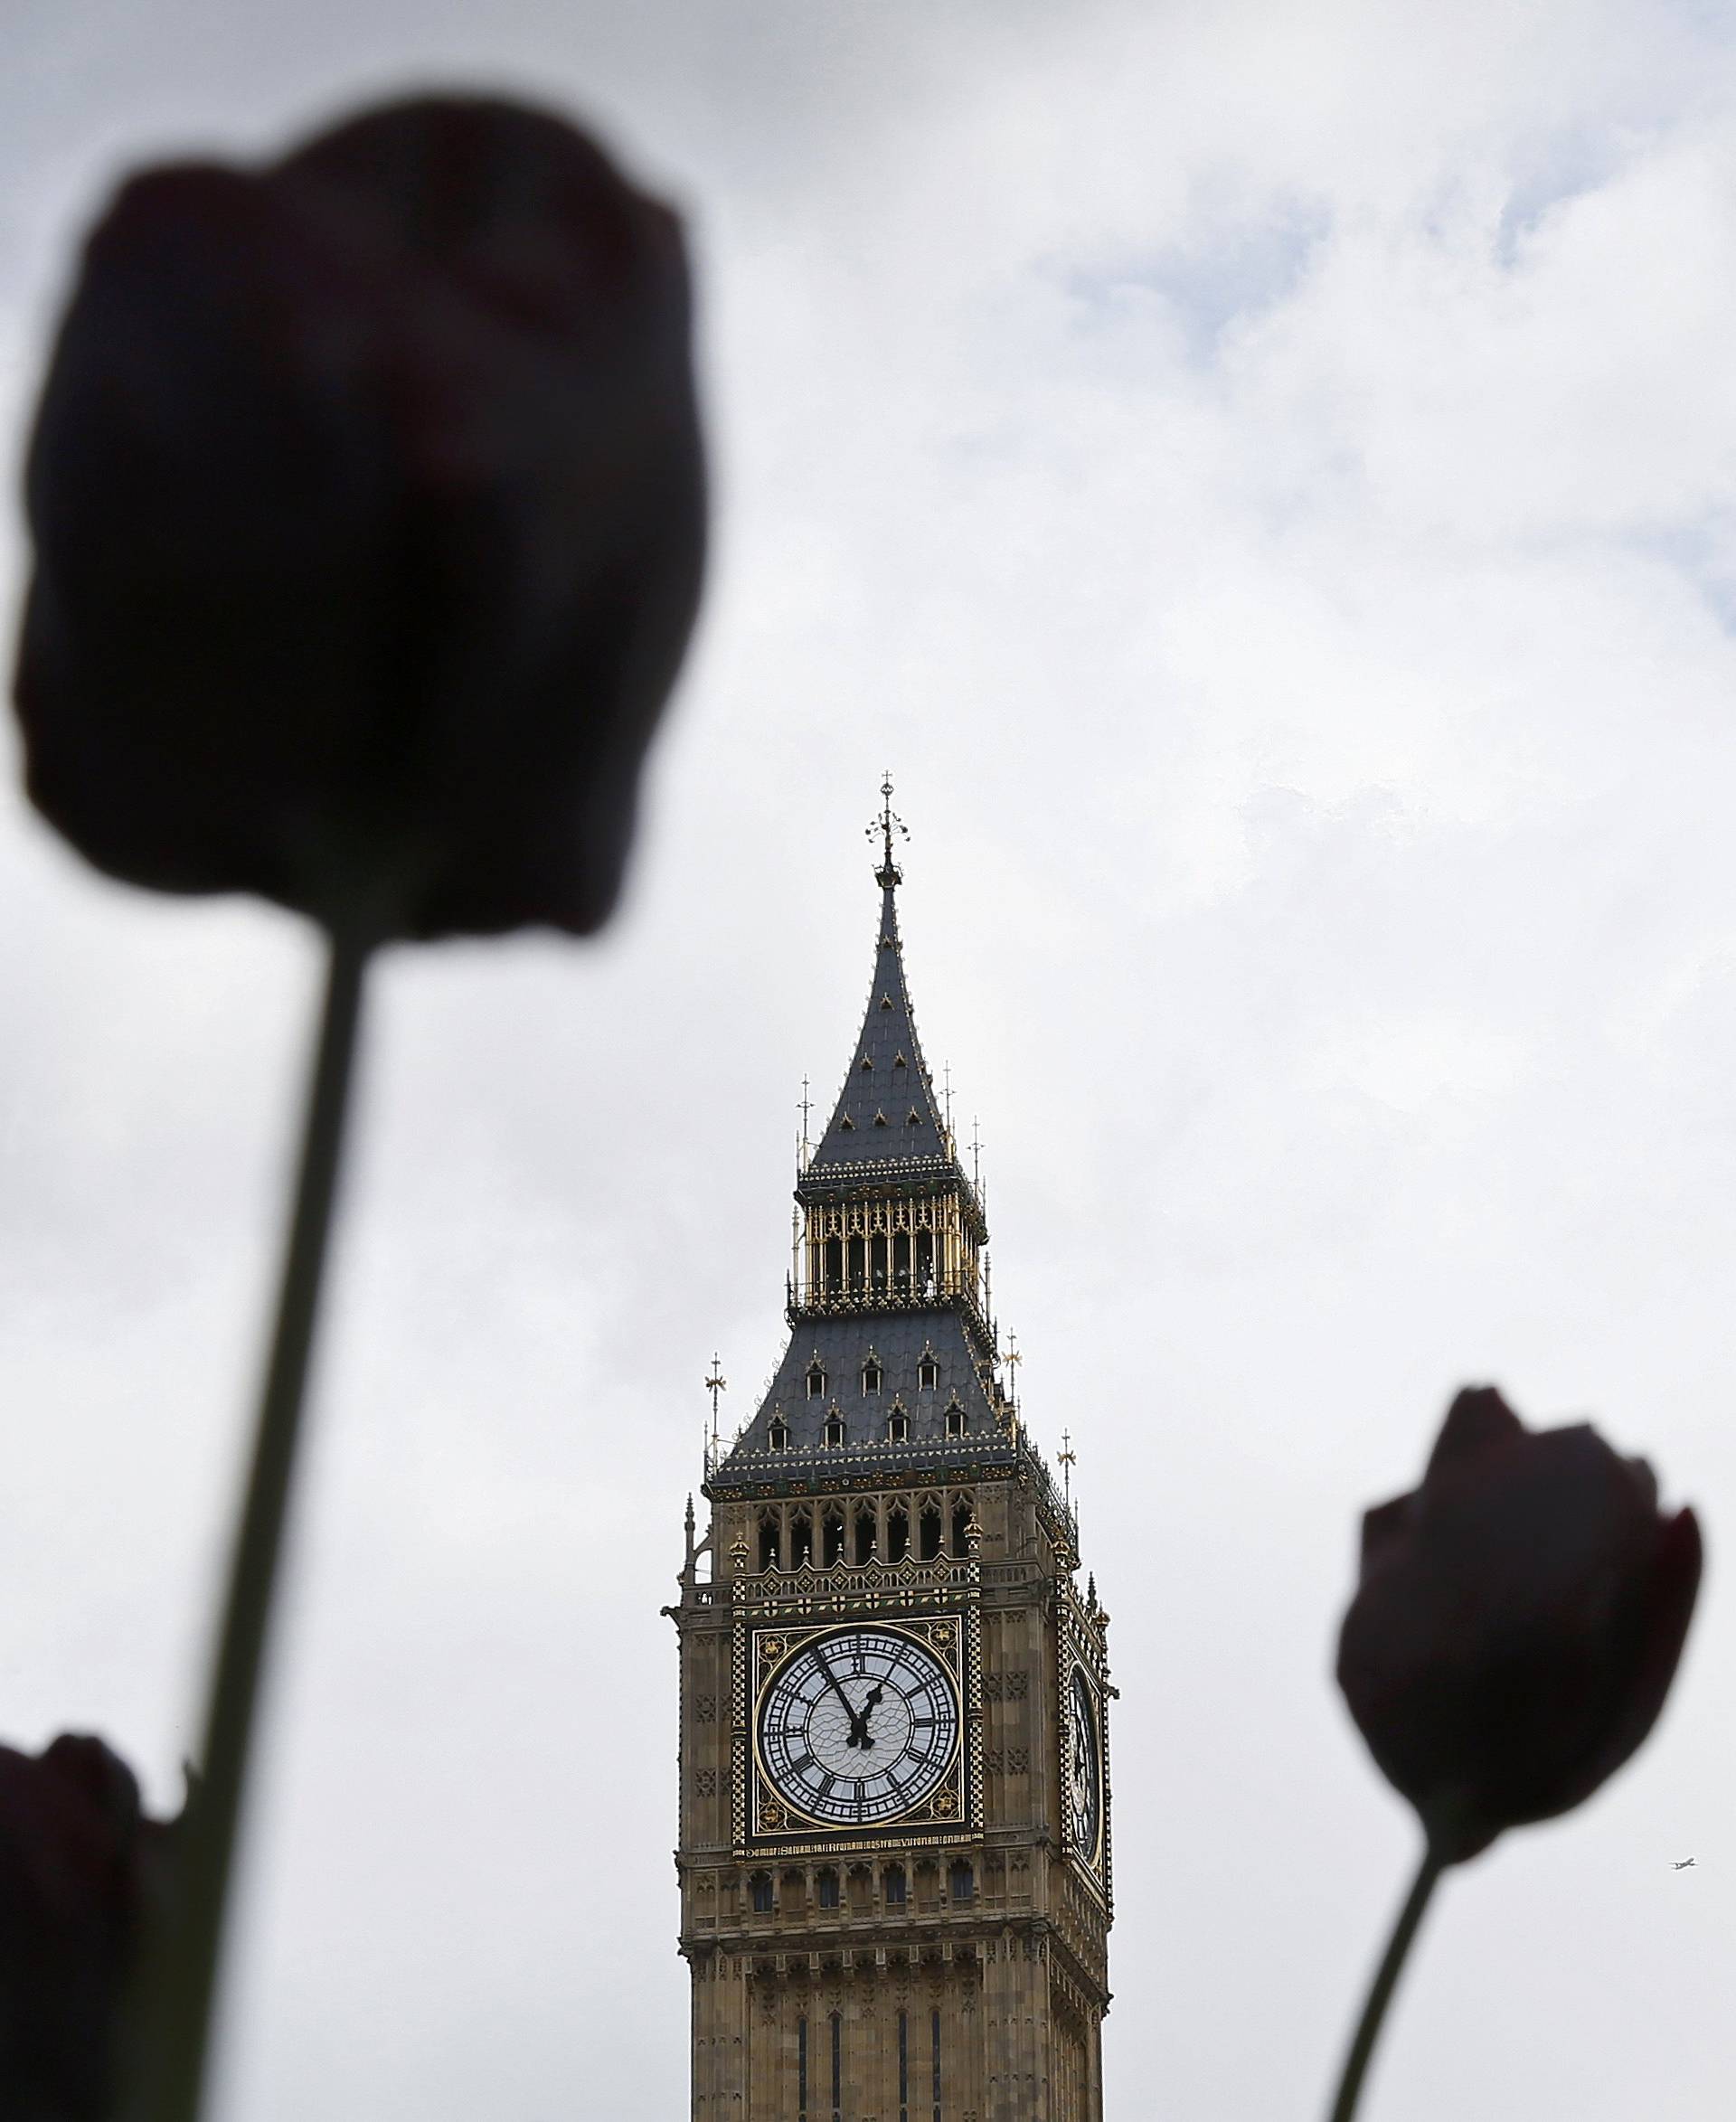 The Big Ben bell tower is seen behind flowers at the Houses of Parliament in central London